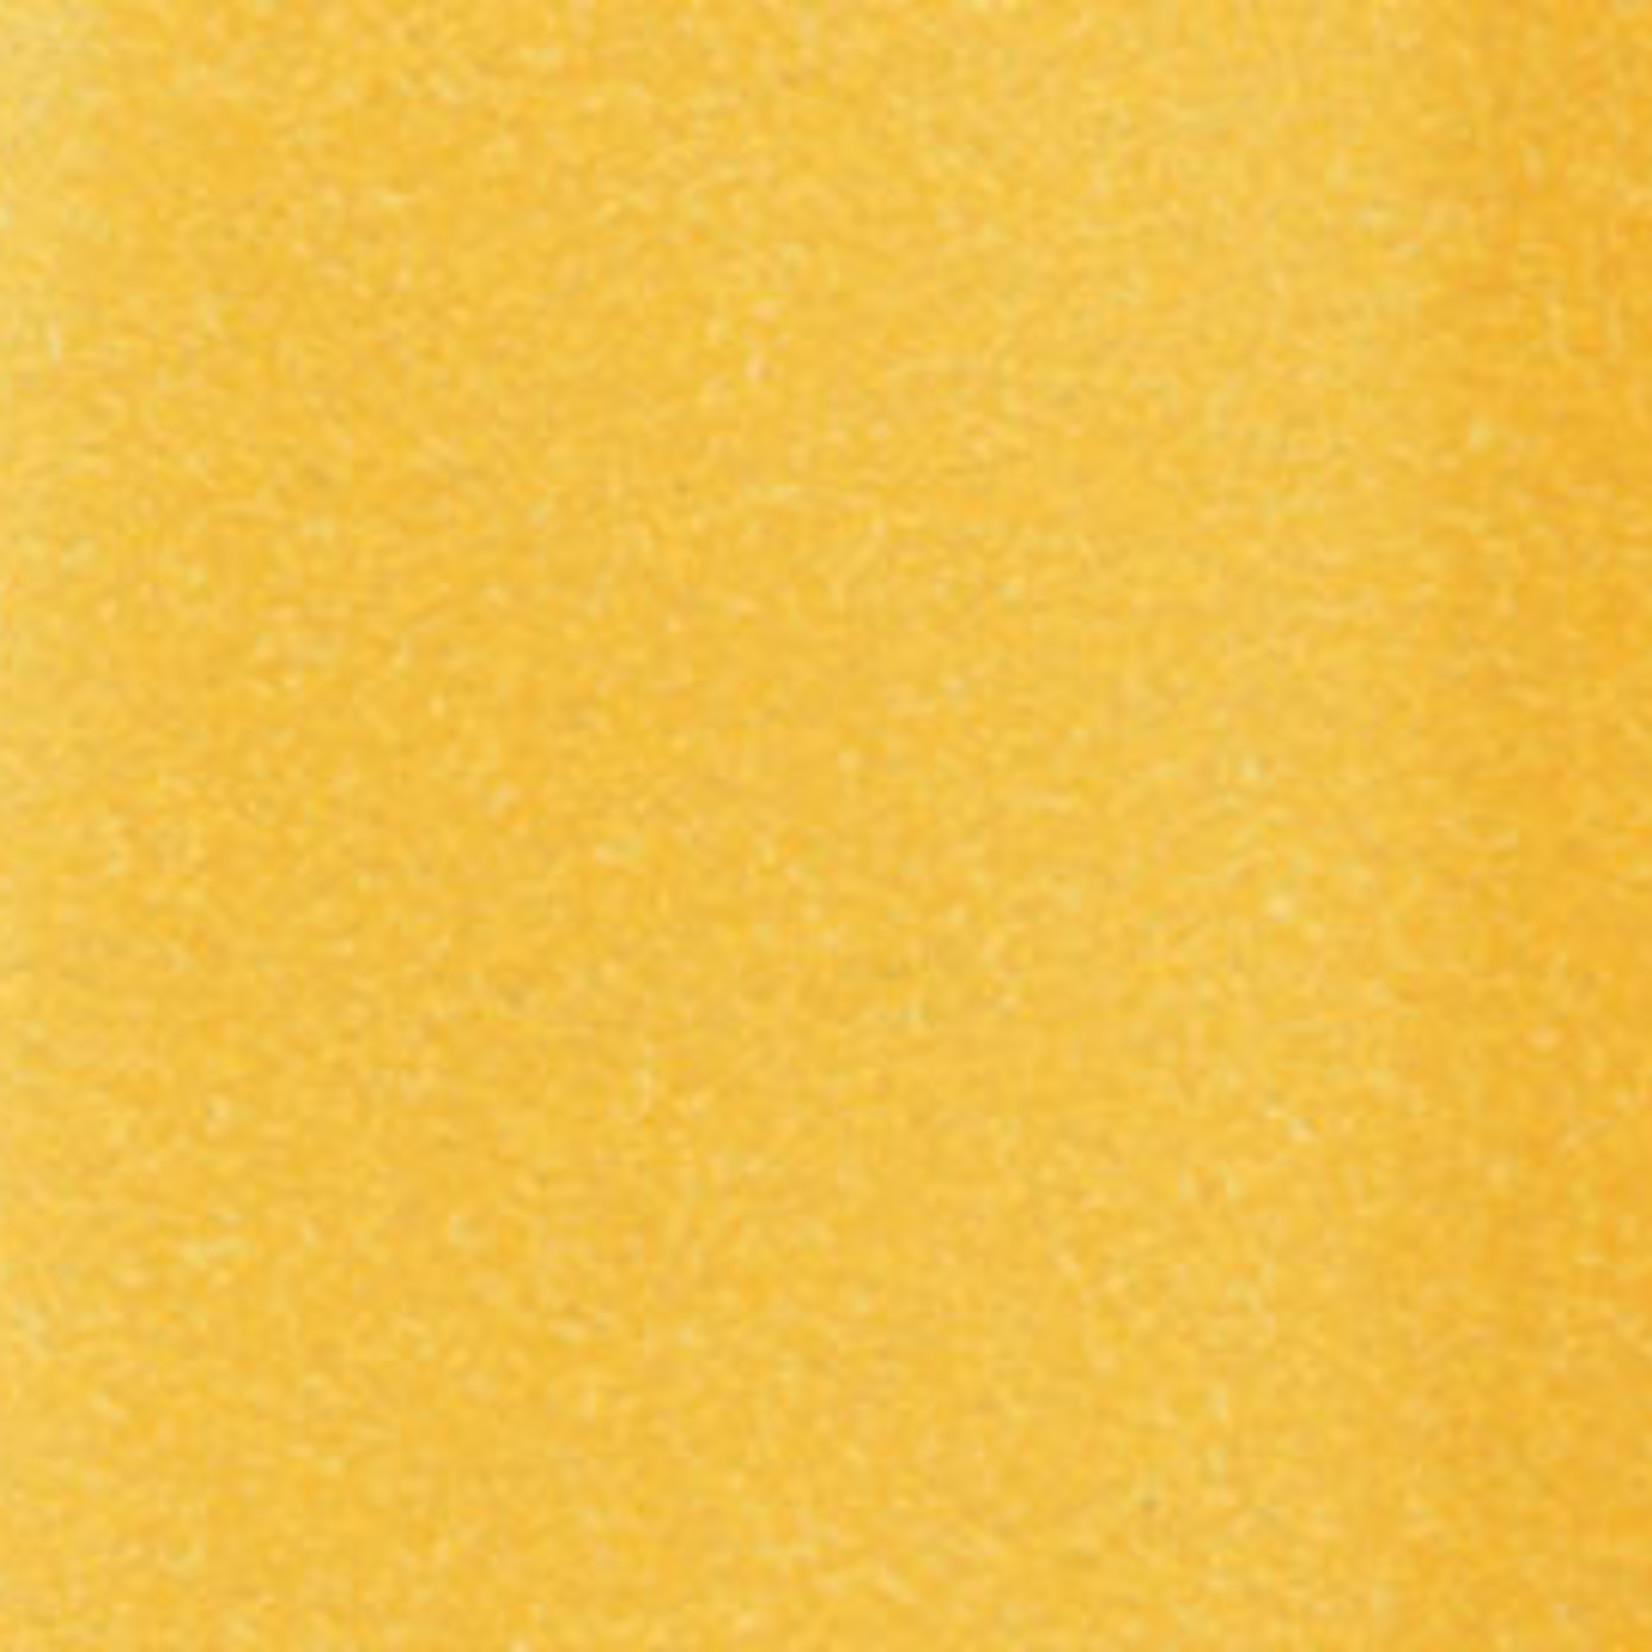 COPIC COPIC SKETCH Y21 BUTTERCUP YELLOW